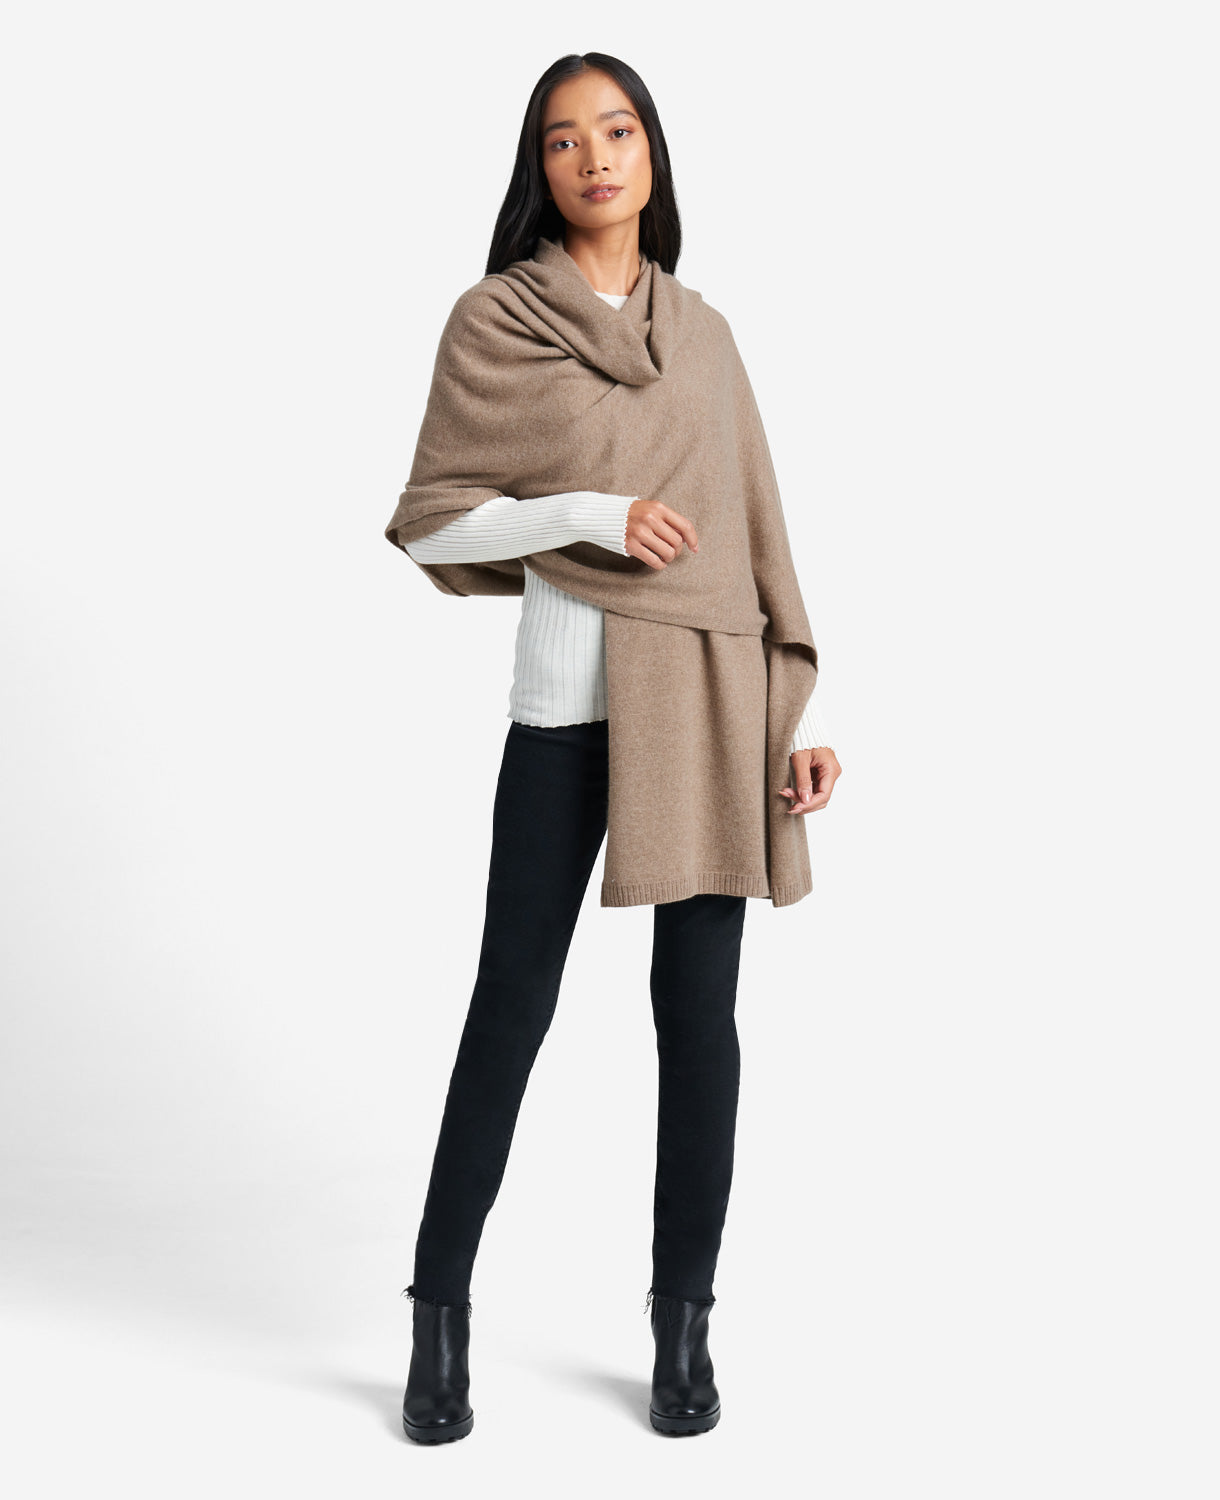 Kenneth Cole Site Exclusive! Pure Cashmere Multi-wear Wrap In Oatmeal